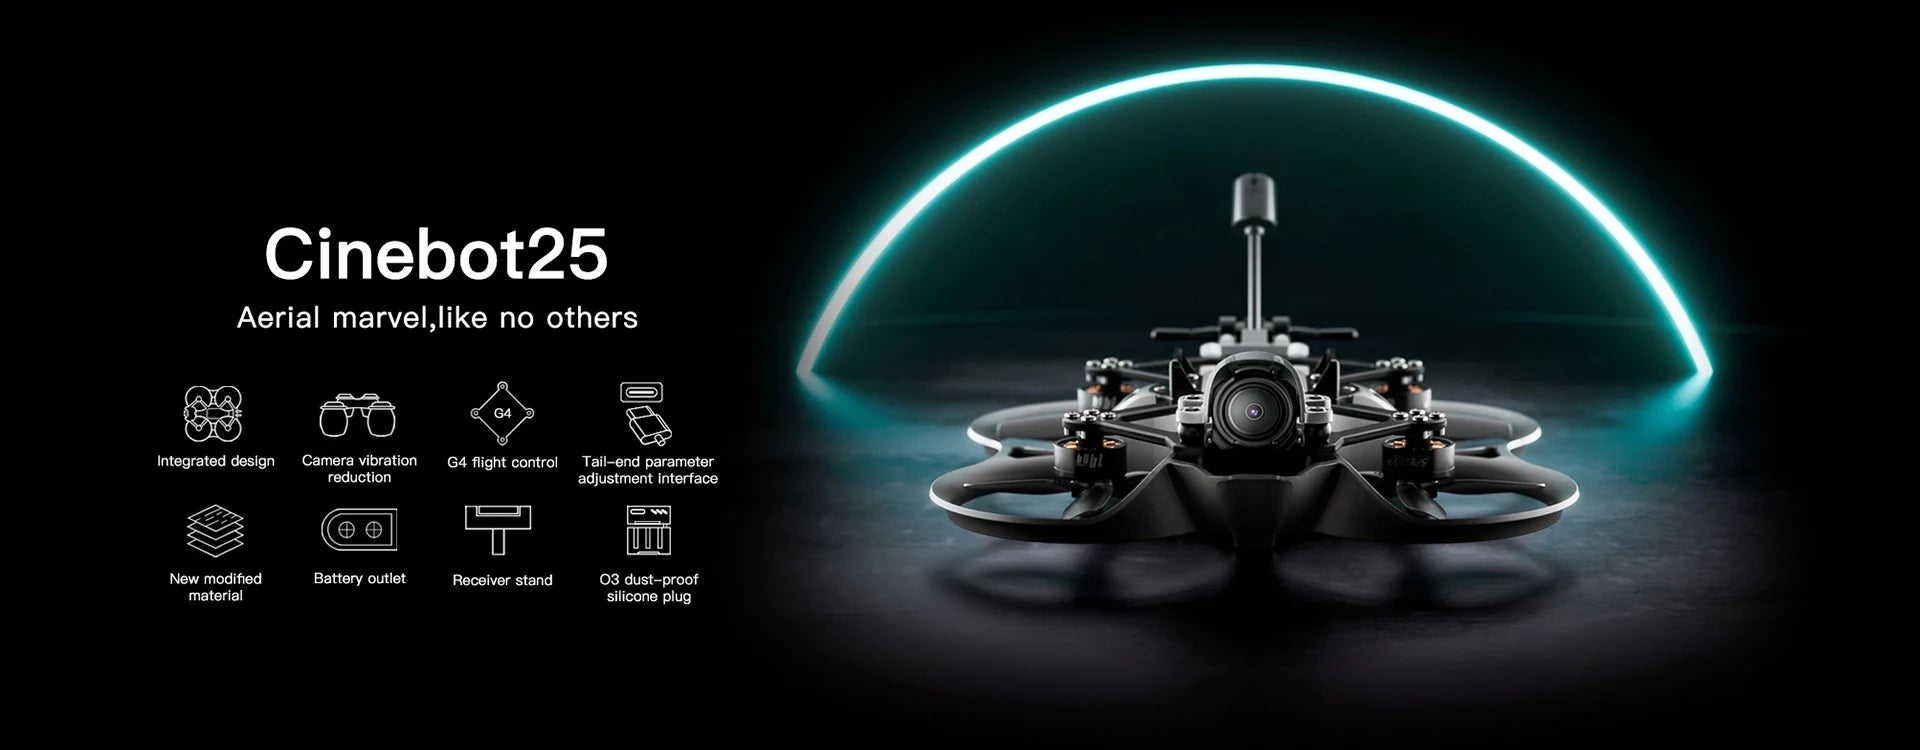 GEPRC Cinebot25 S HD Wasp FPV Drone, Cinebot25 Aerial marvel,like no others G4 Integrated design Camera vibration G